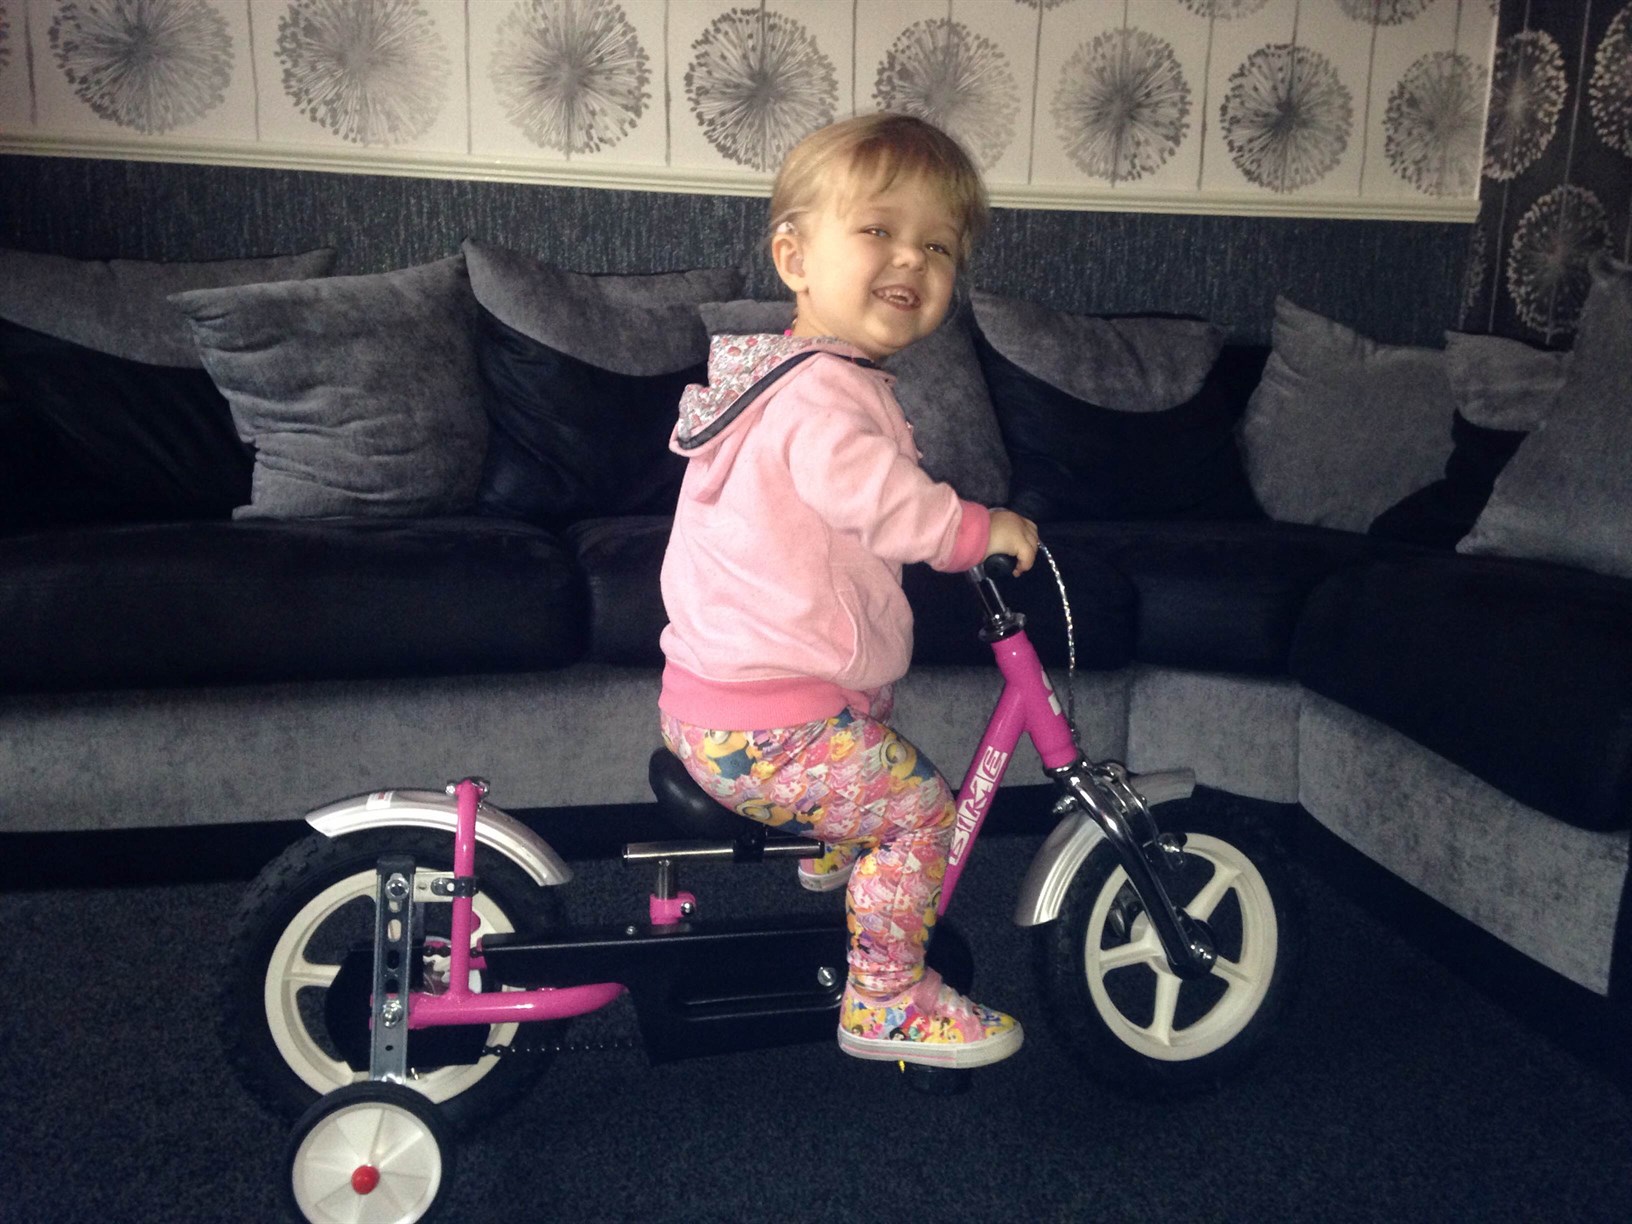 Abi on her pink bicycle